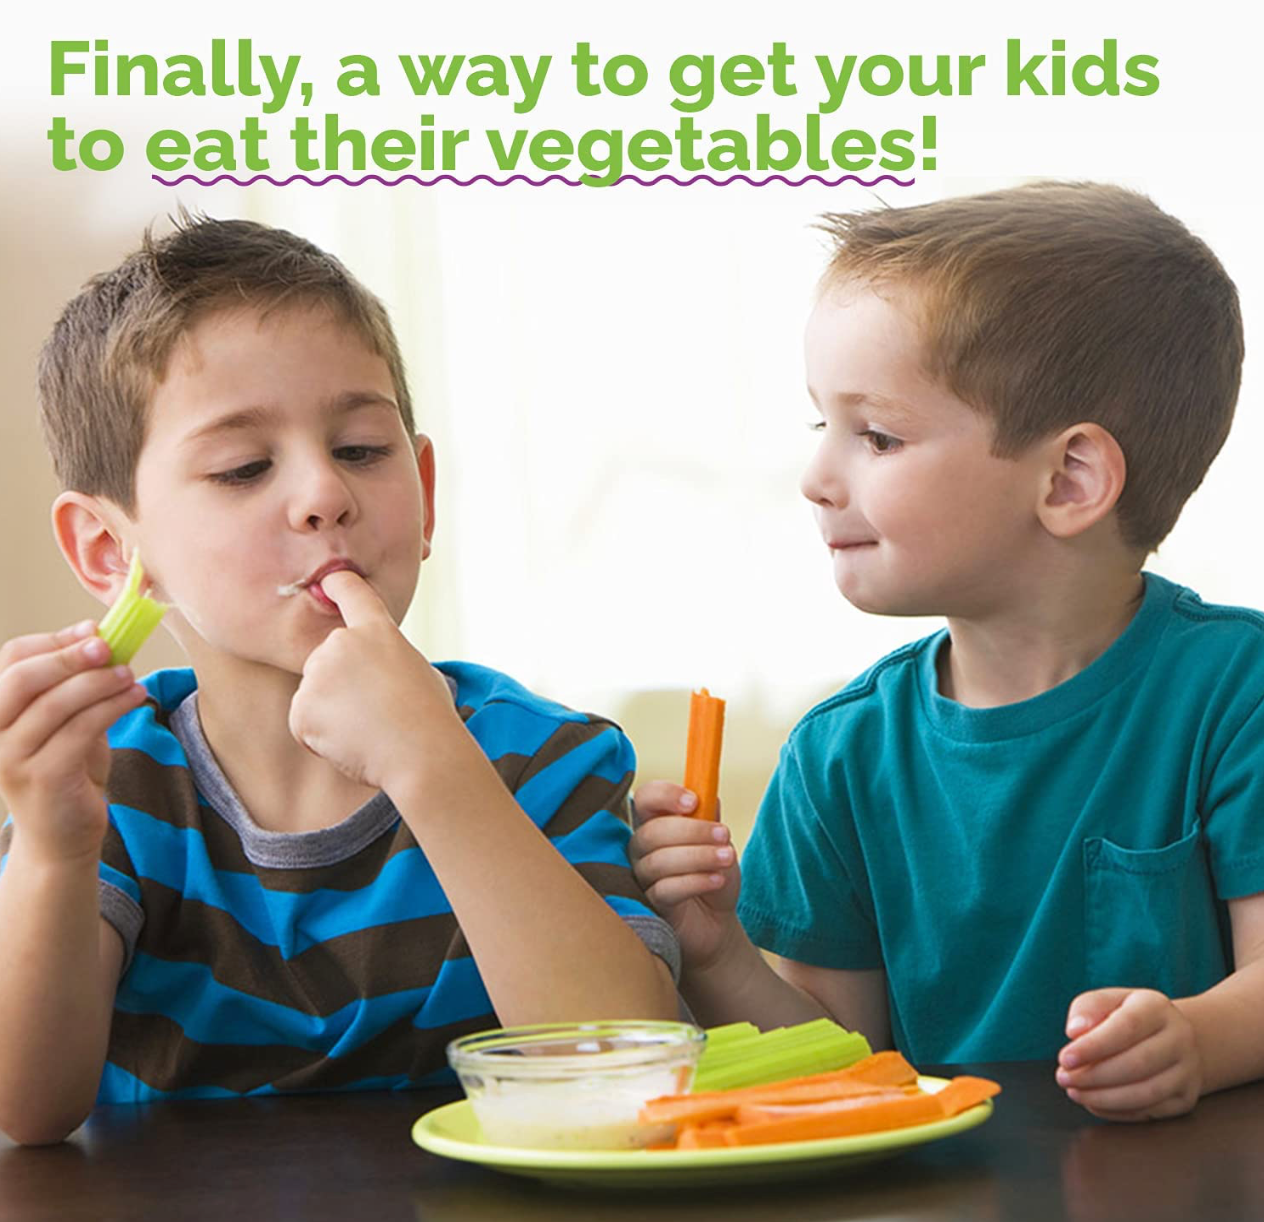 Ways to get kids to eat their vegetables!